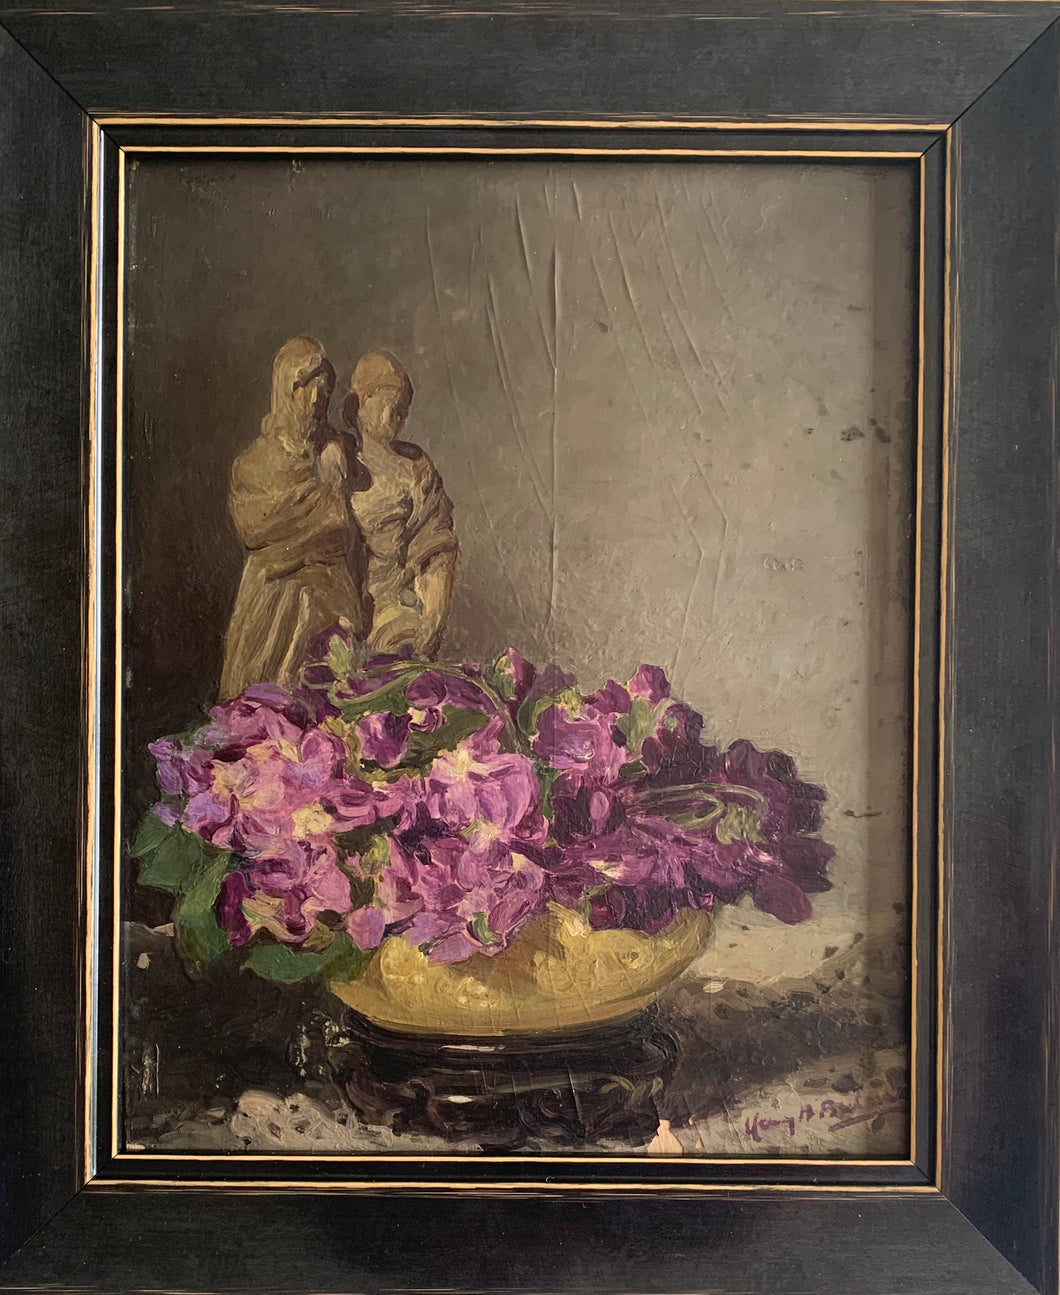 Oil painting on board: Violets and figures (signature indistinct)